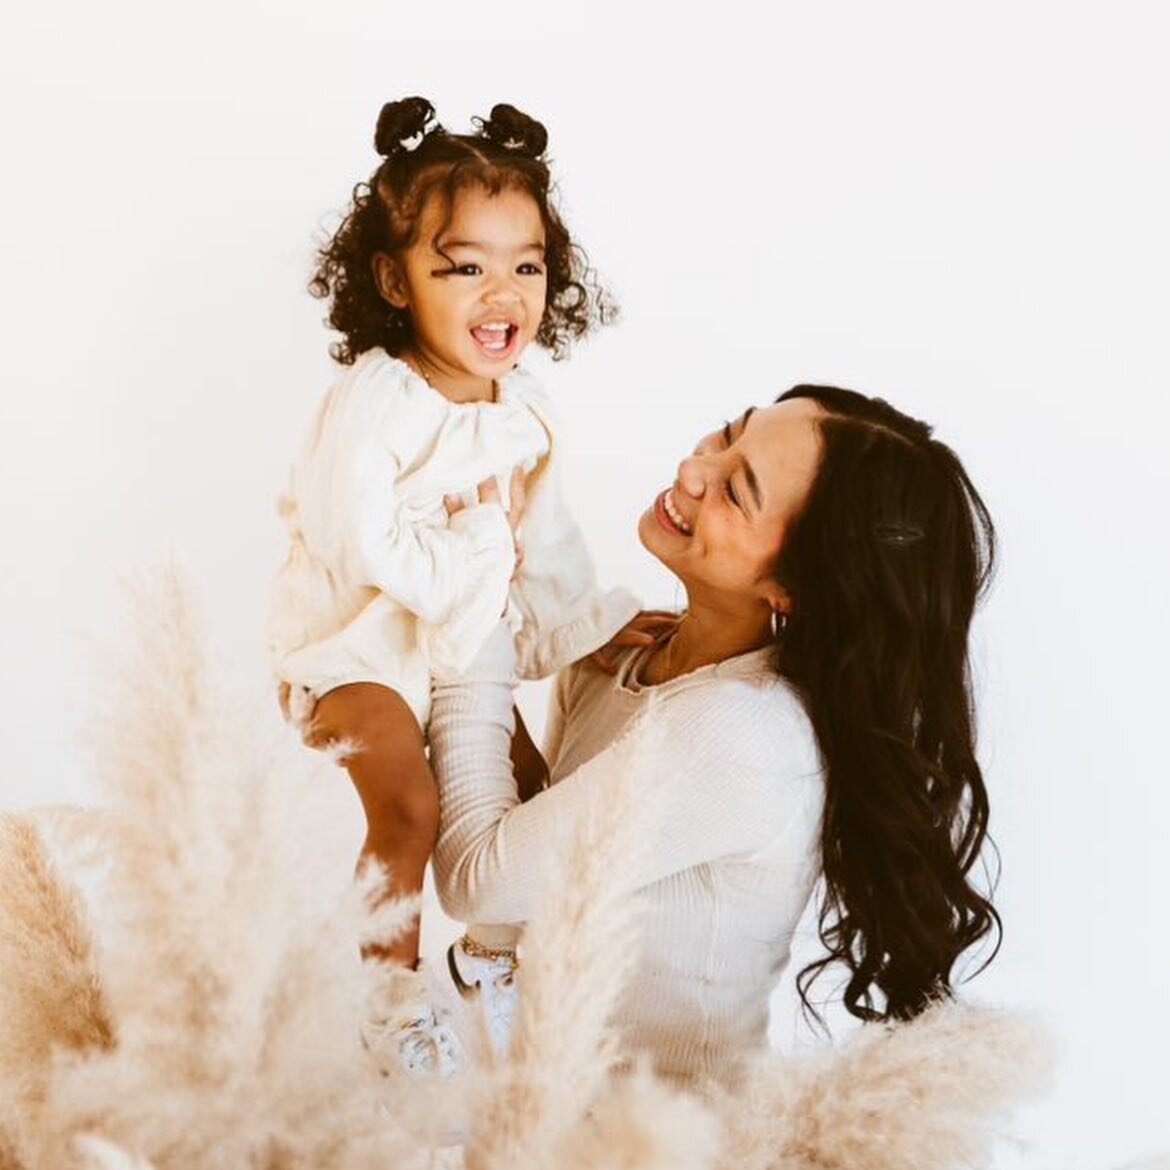 cutest mom and daughter duo!
tag us in your fav @graysoncollective fits

shop Grayson Collective on Target.com or in select stores
@targetstyle @target
#graysonthreads #graysoncollective #babyclothes #toddlerclothes #targetstyle #babyootd #target #na